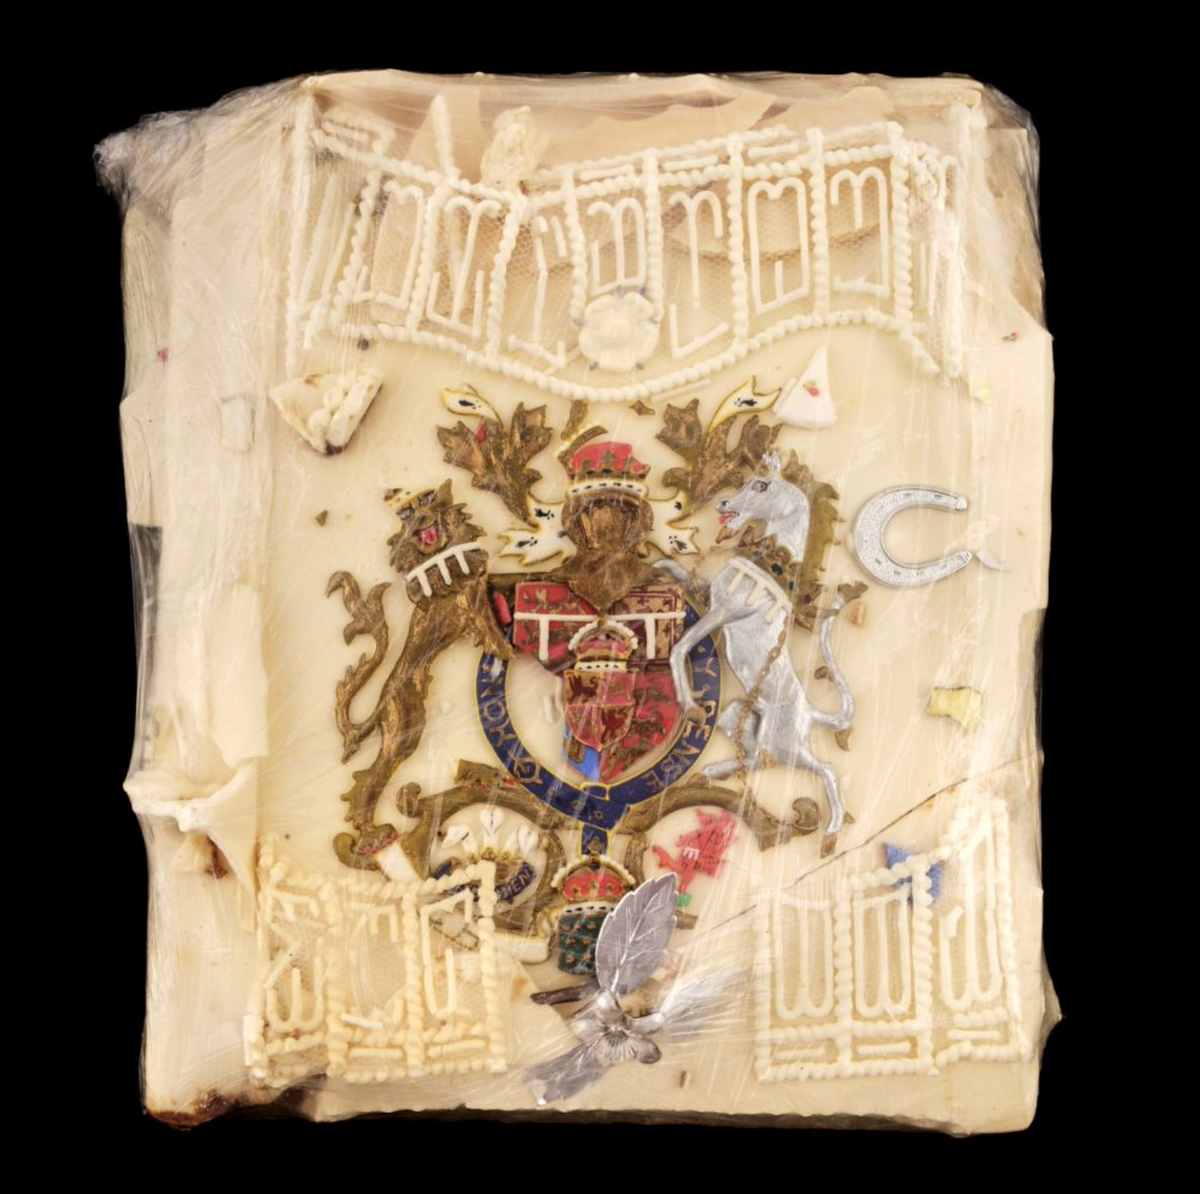 The slice of cake icing with the Royal Coat-of-Arms from the wedding of Prince Charles and Lady Diana Spencer in 1981 Courtesy of Dominic Winter Auctioneers